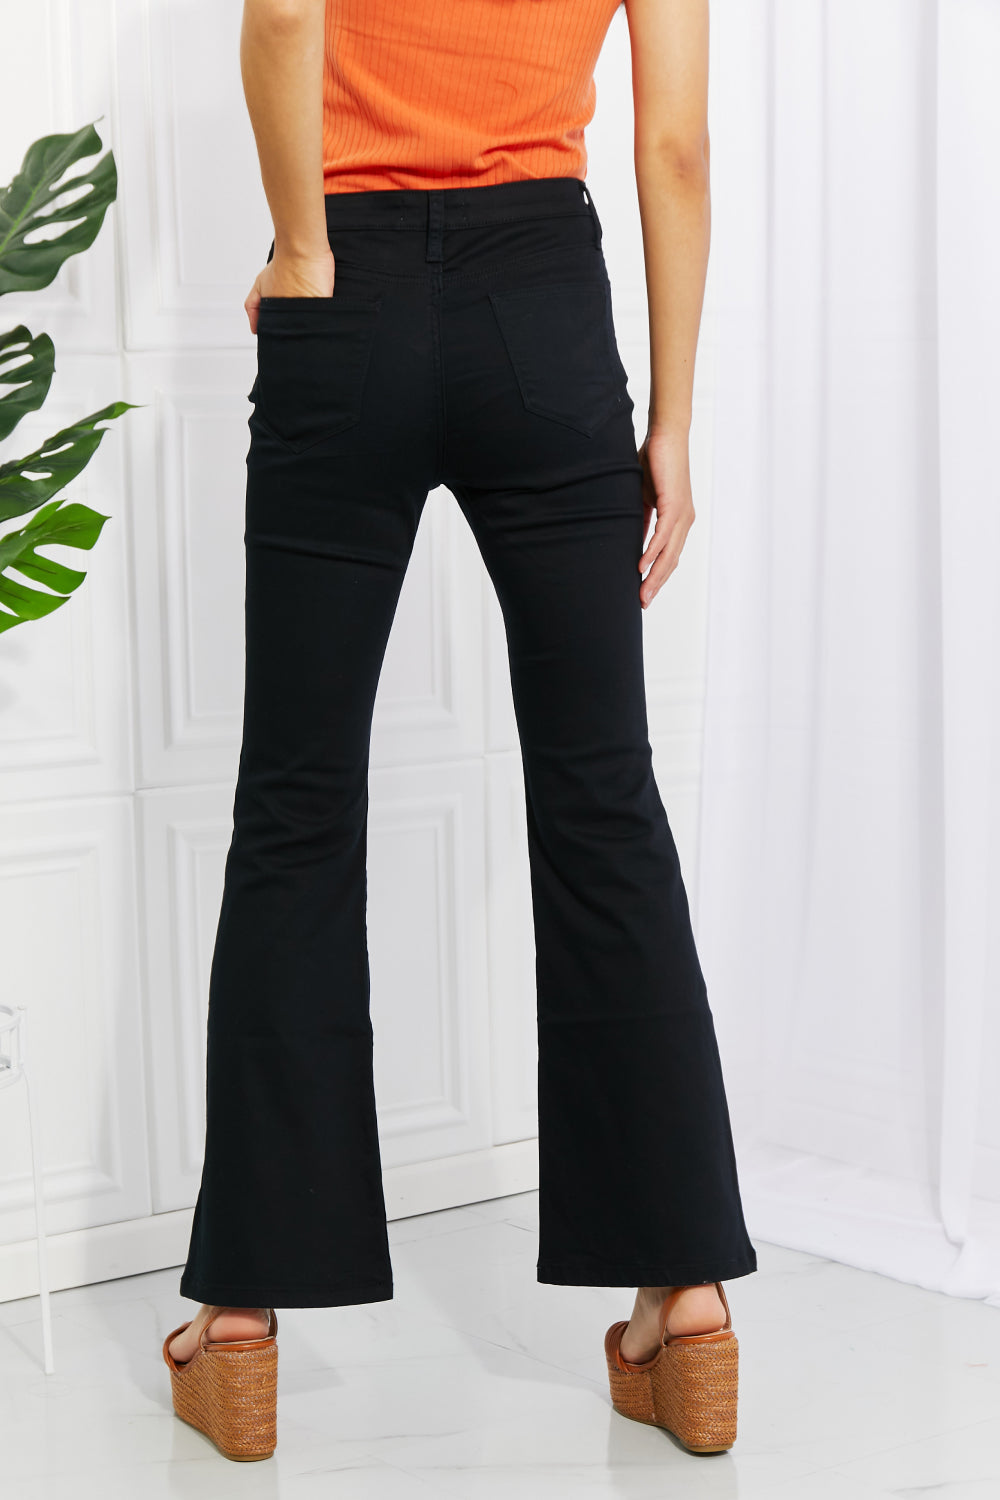 Zenana Clementine Full Size High-Rise Bootcut Jeans in Black